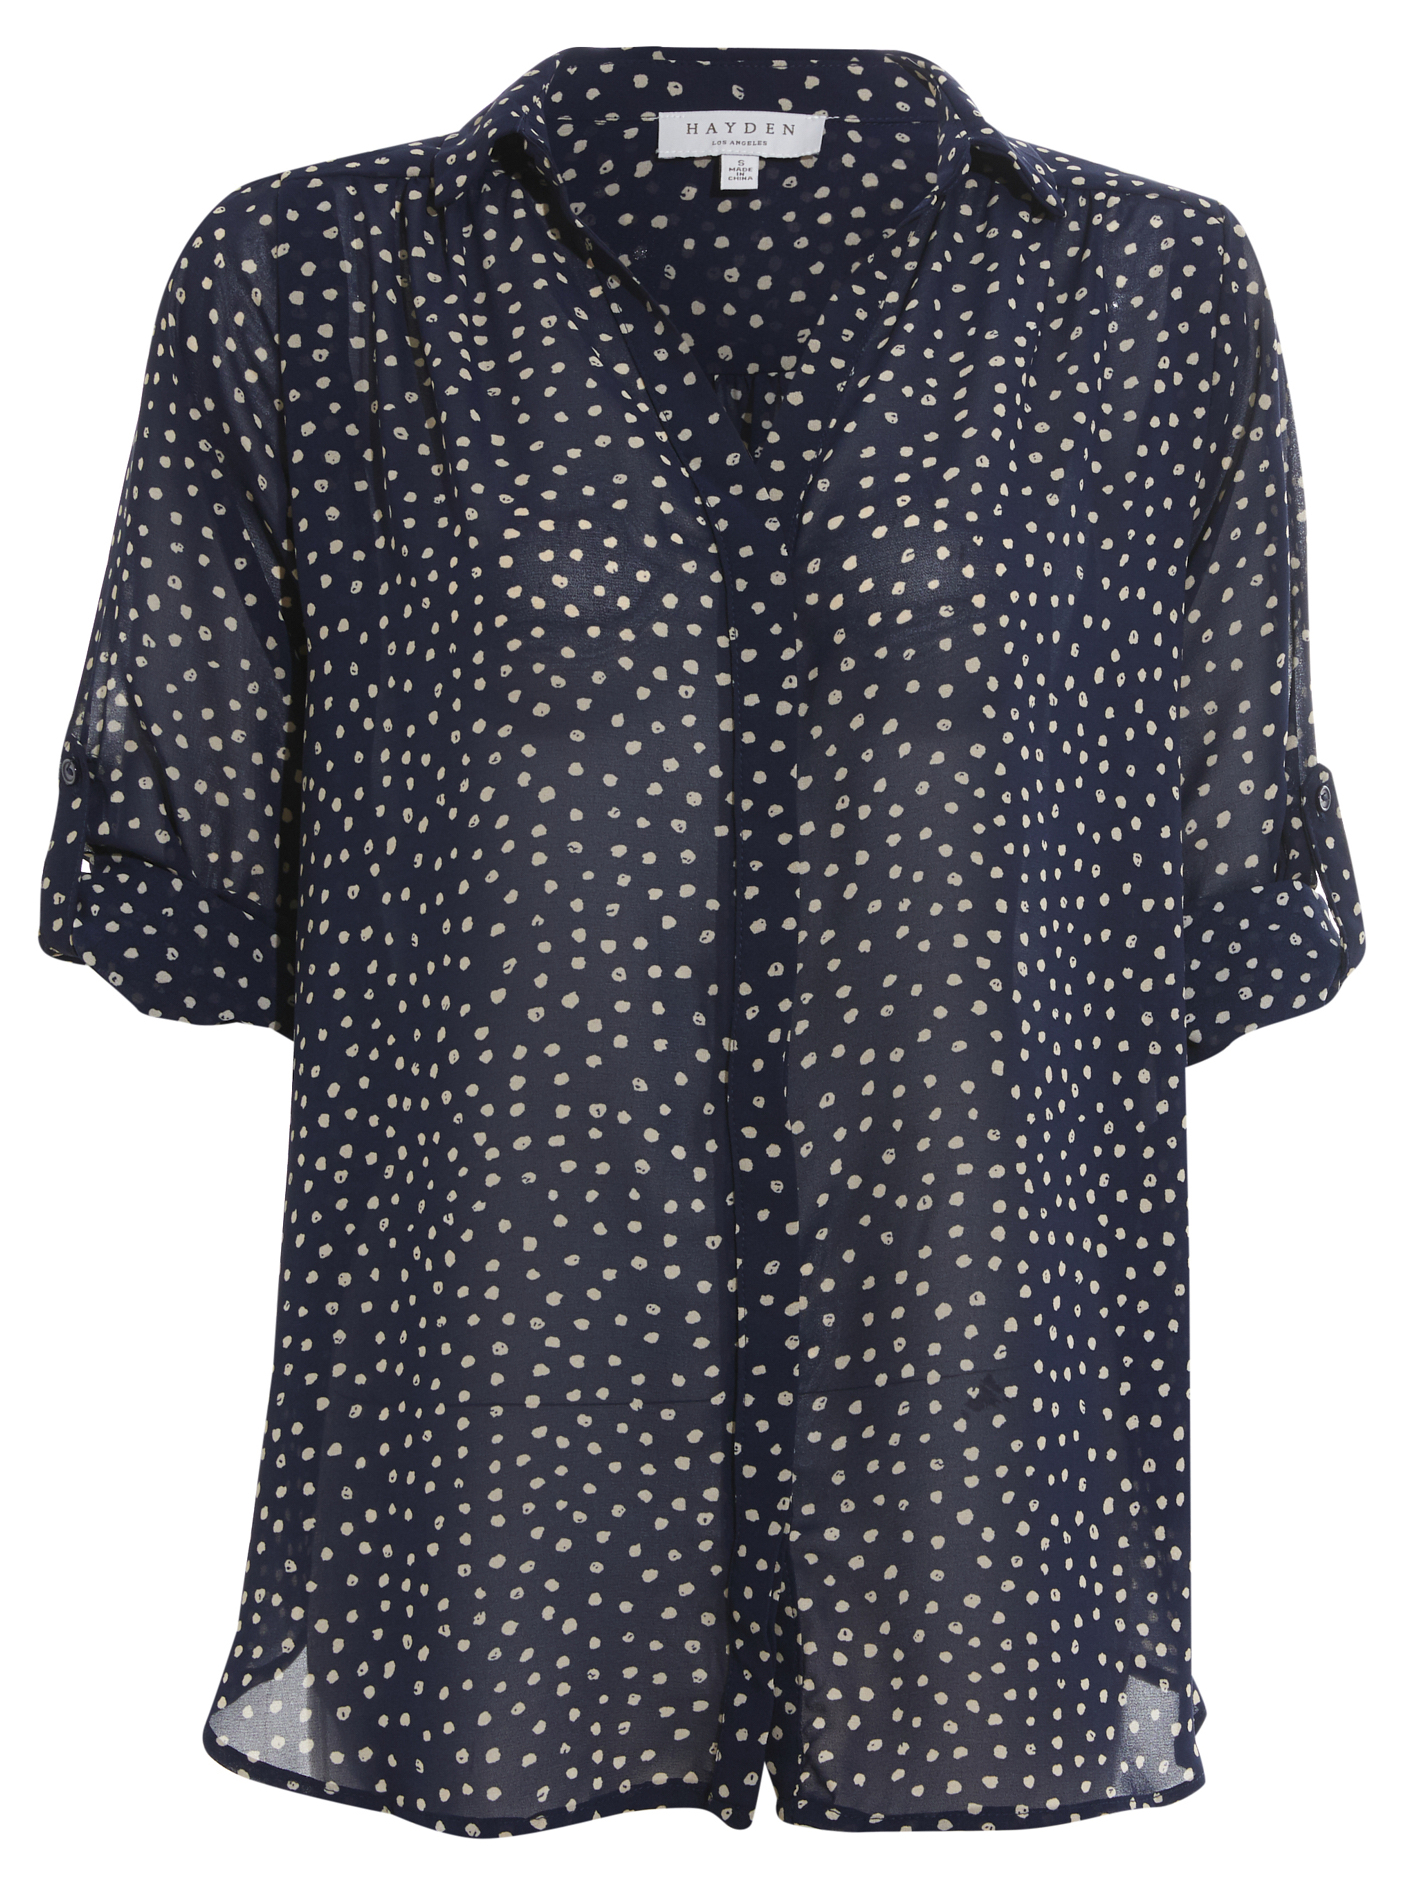 Polka Dot Top with Hidden Button Front